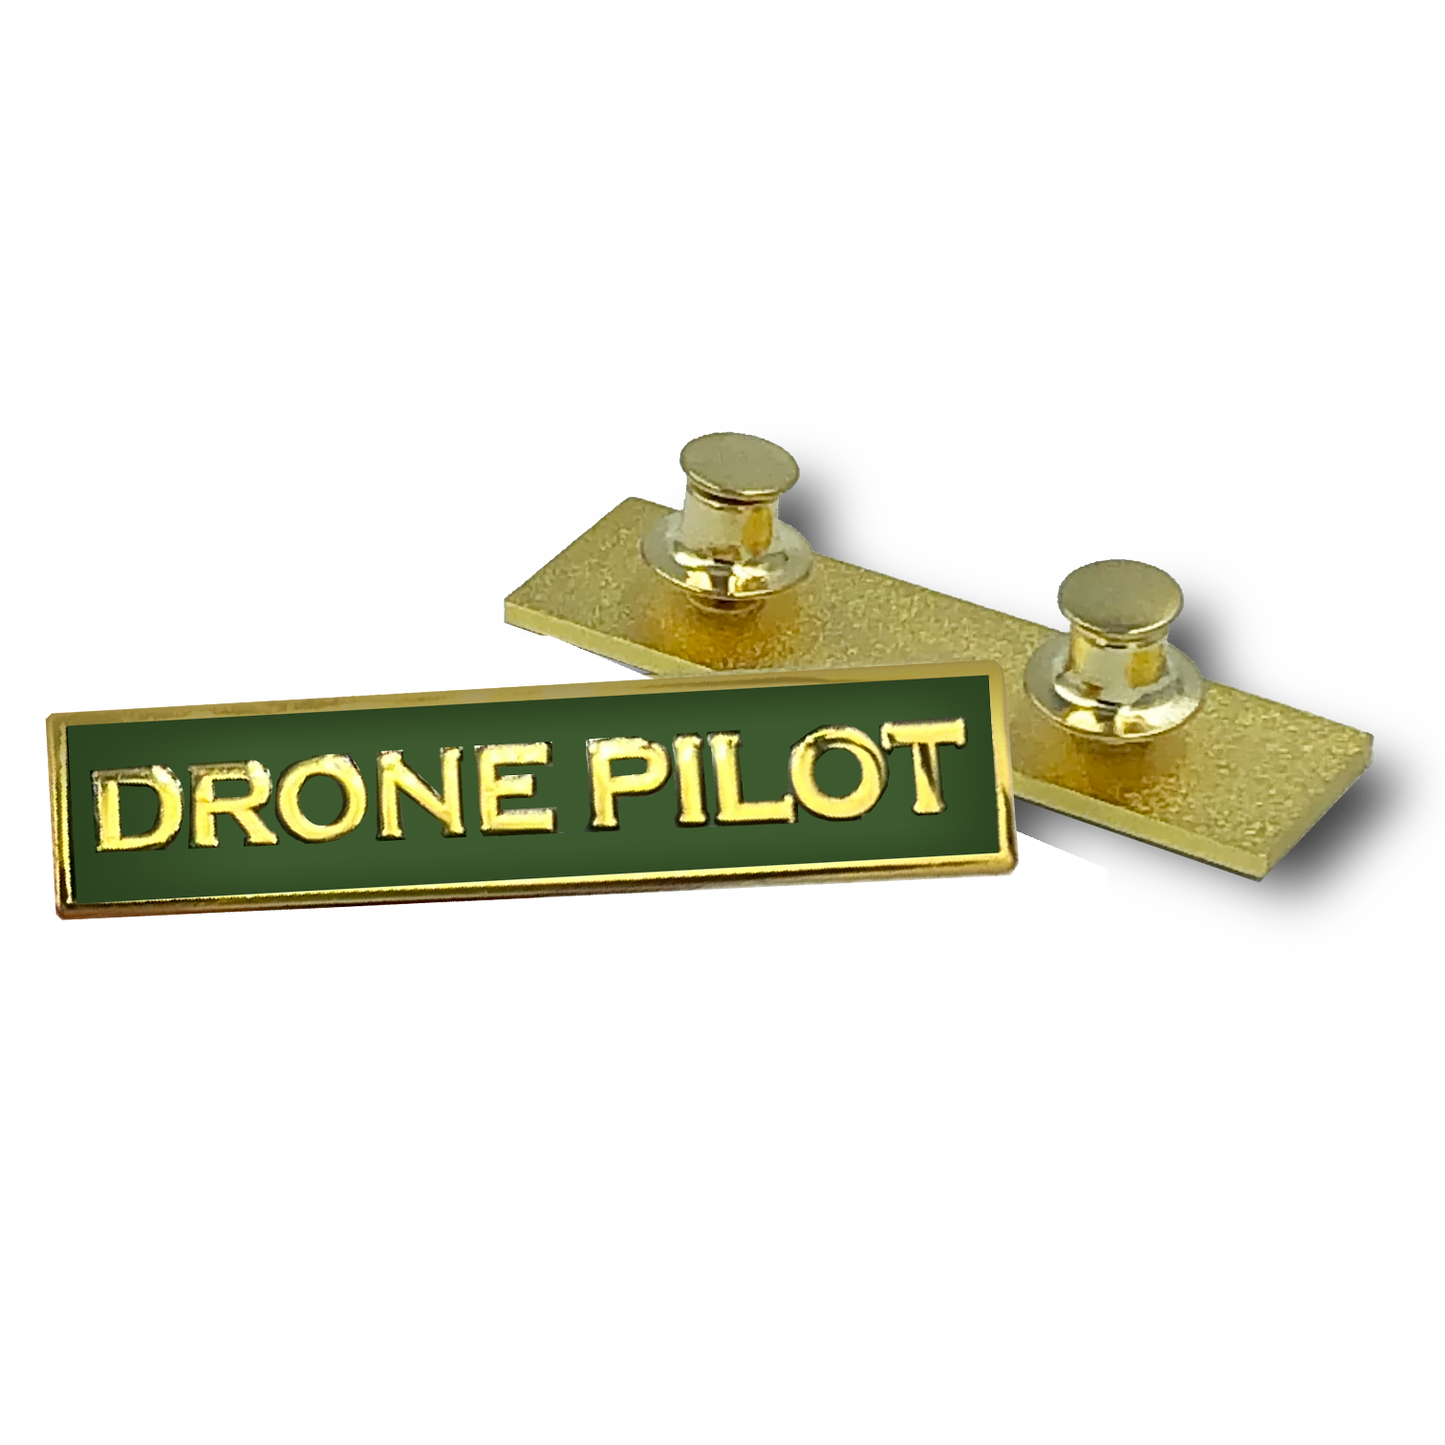 PBX-003-F DRONE PILOT Green Commendation Bar Pin Border Patrol Security Military Army Marines